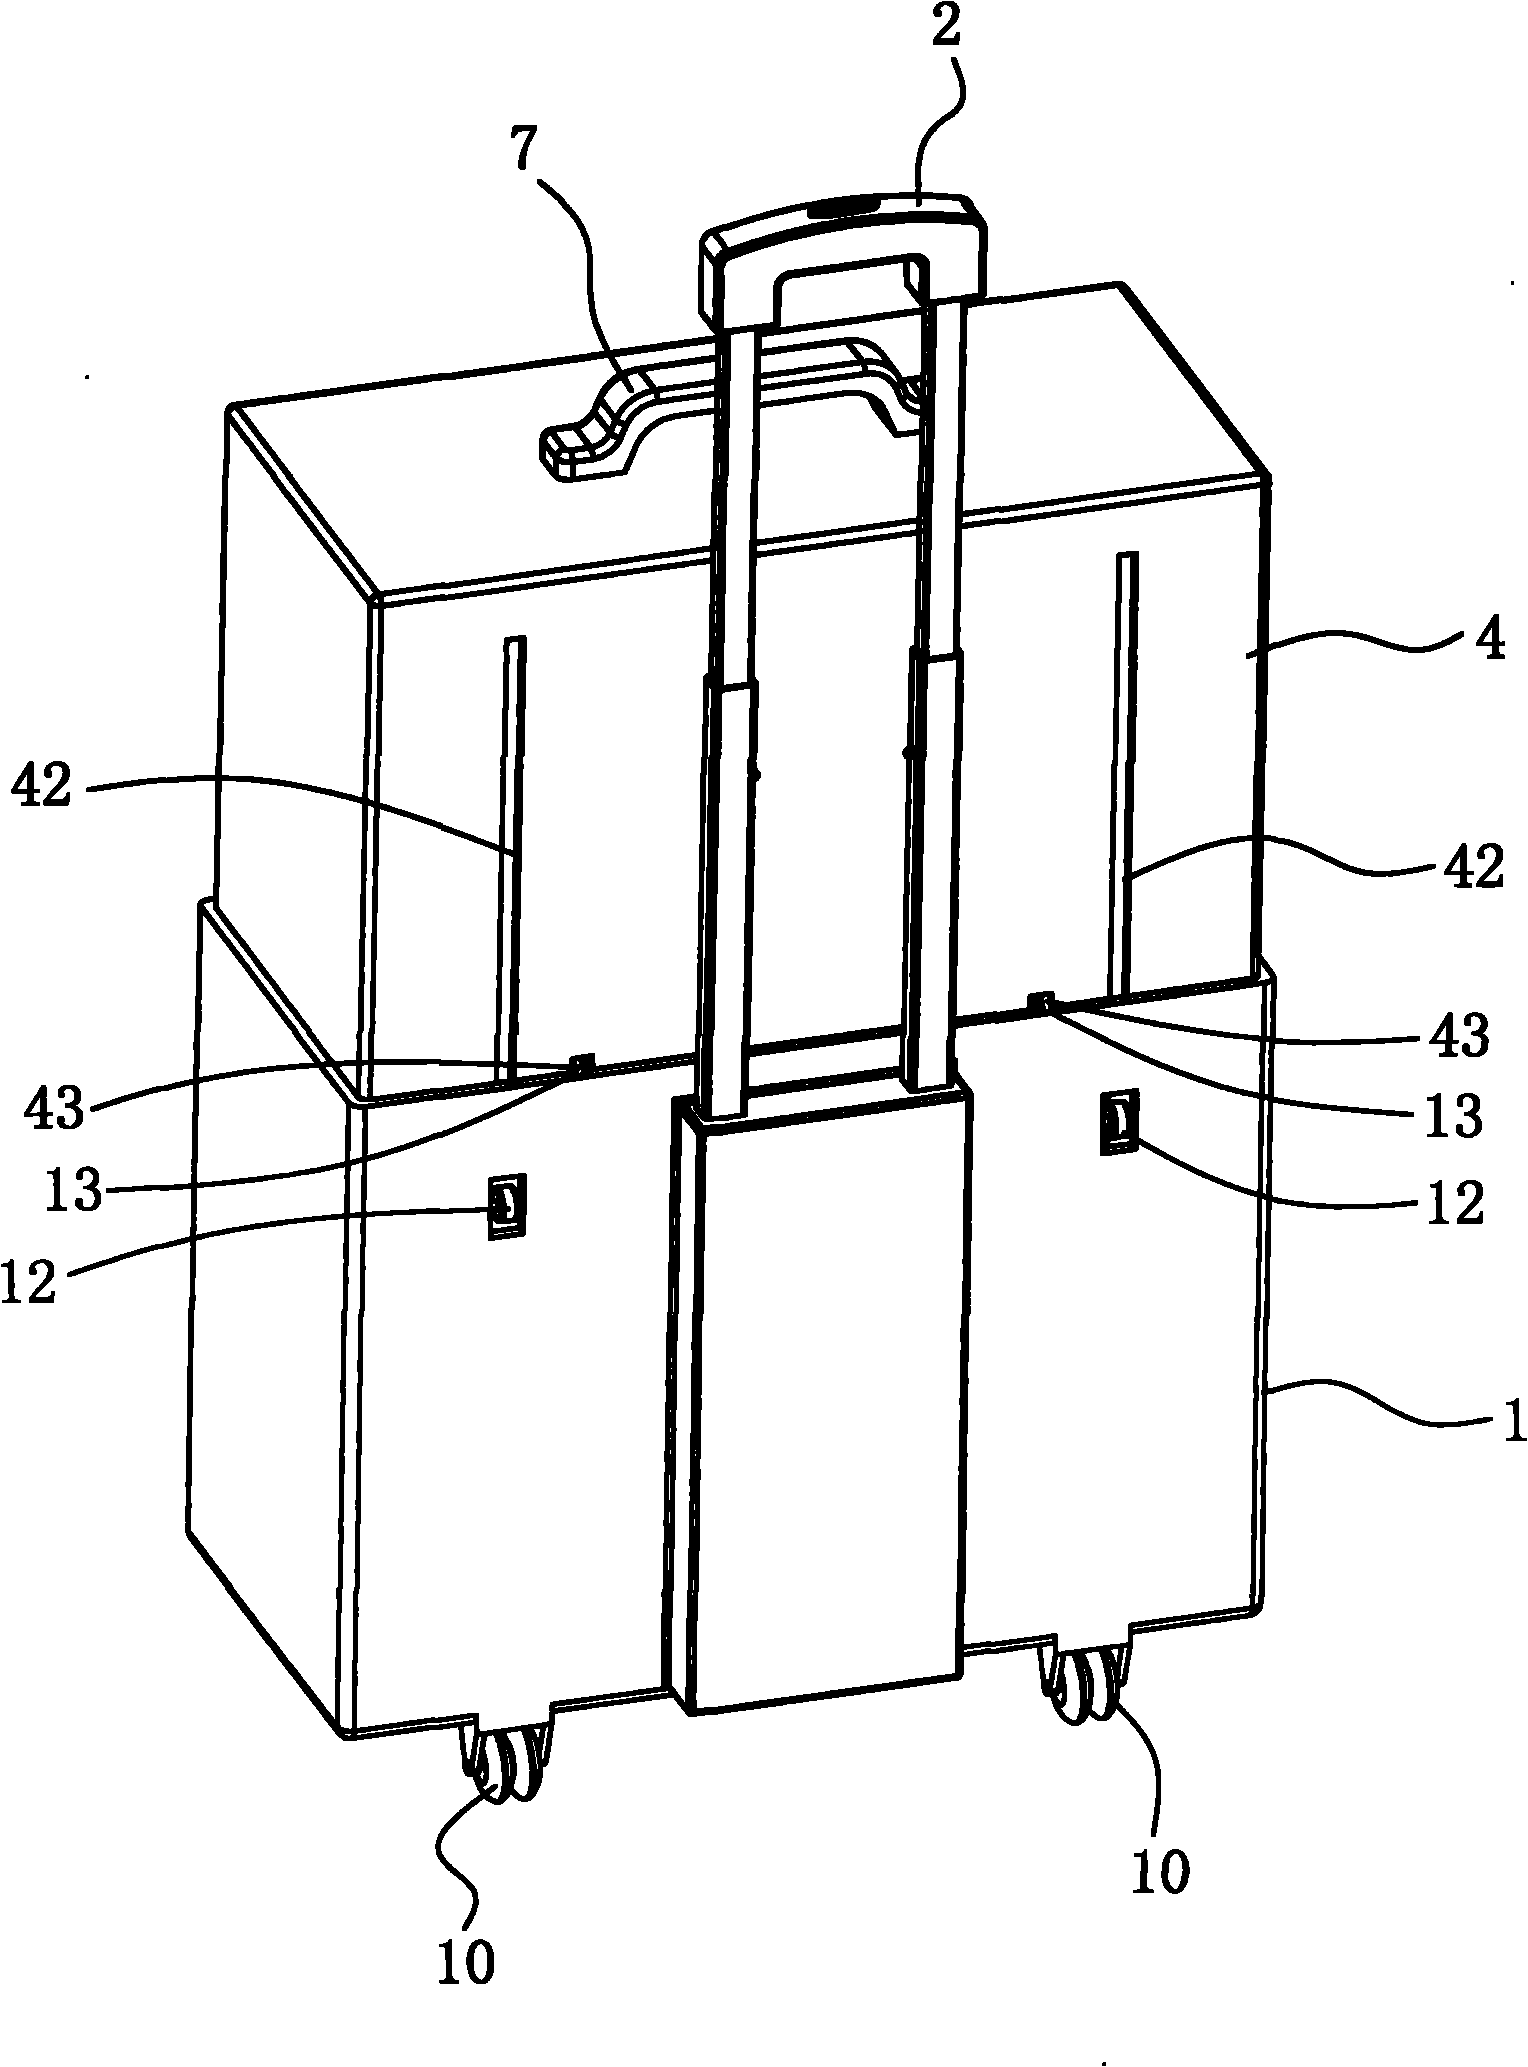 Luggage with pulling structure